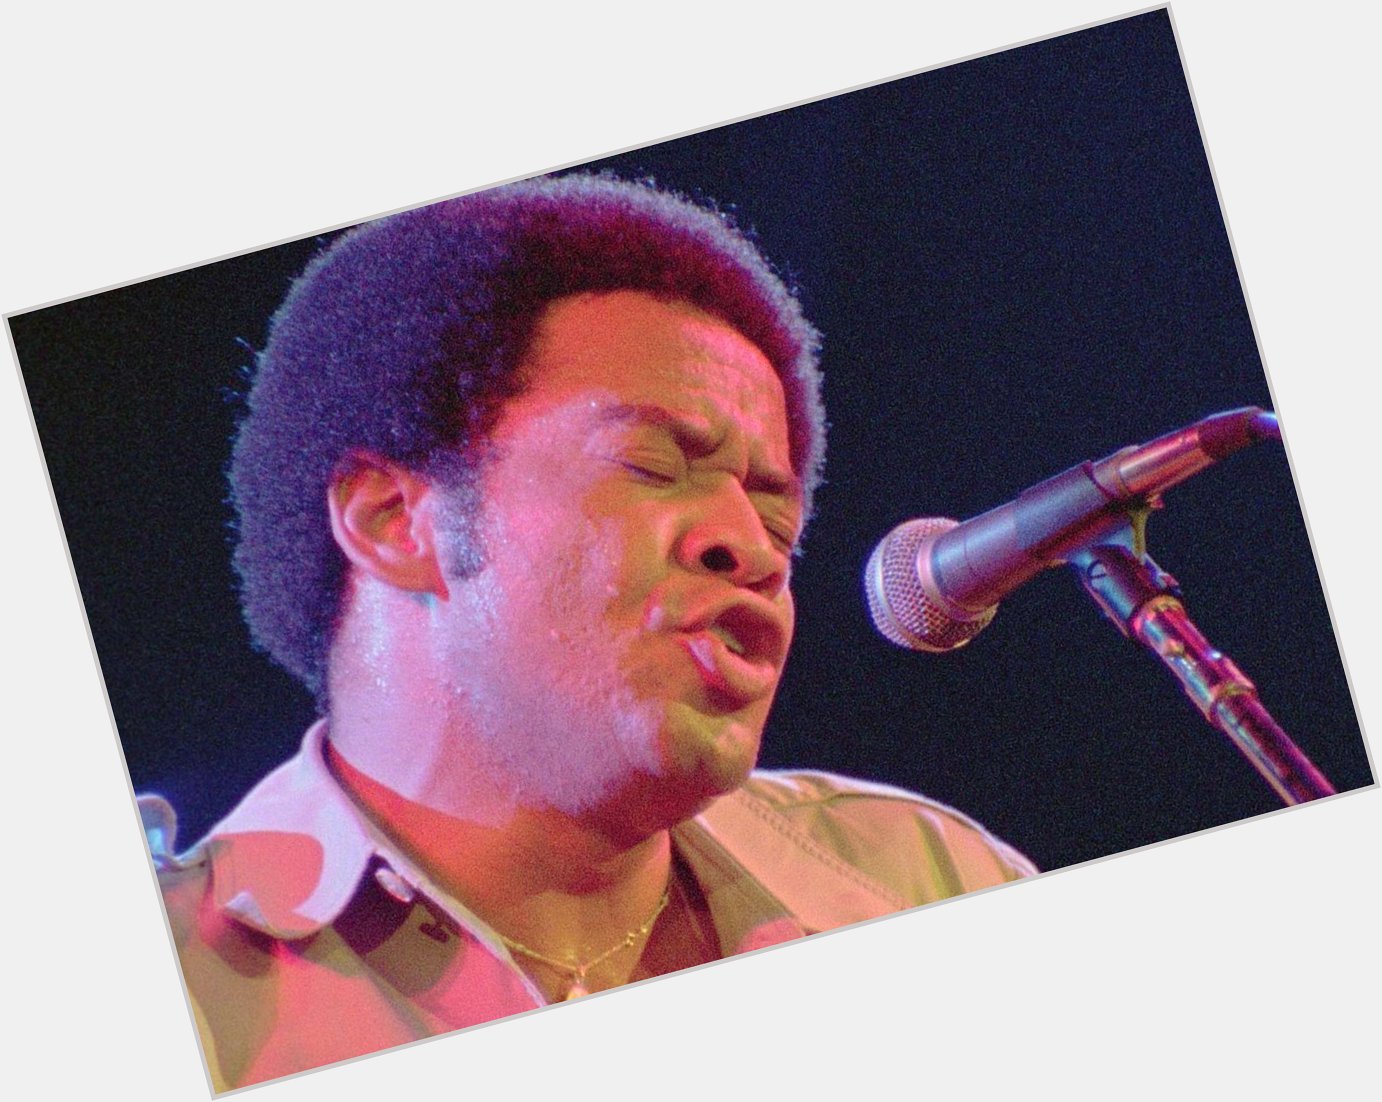 Happy birthday to the great Bill Withers! Download covers of some of his greatest songs:  